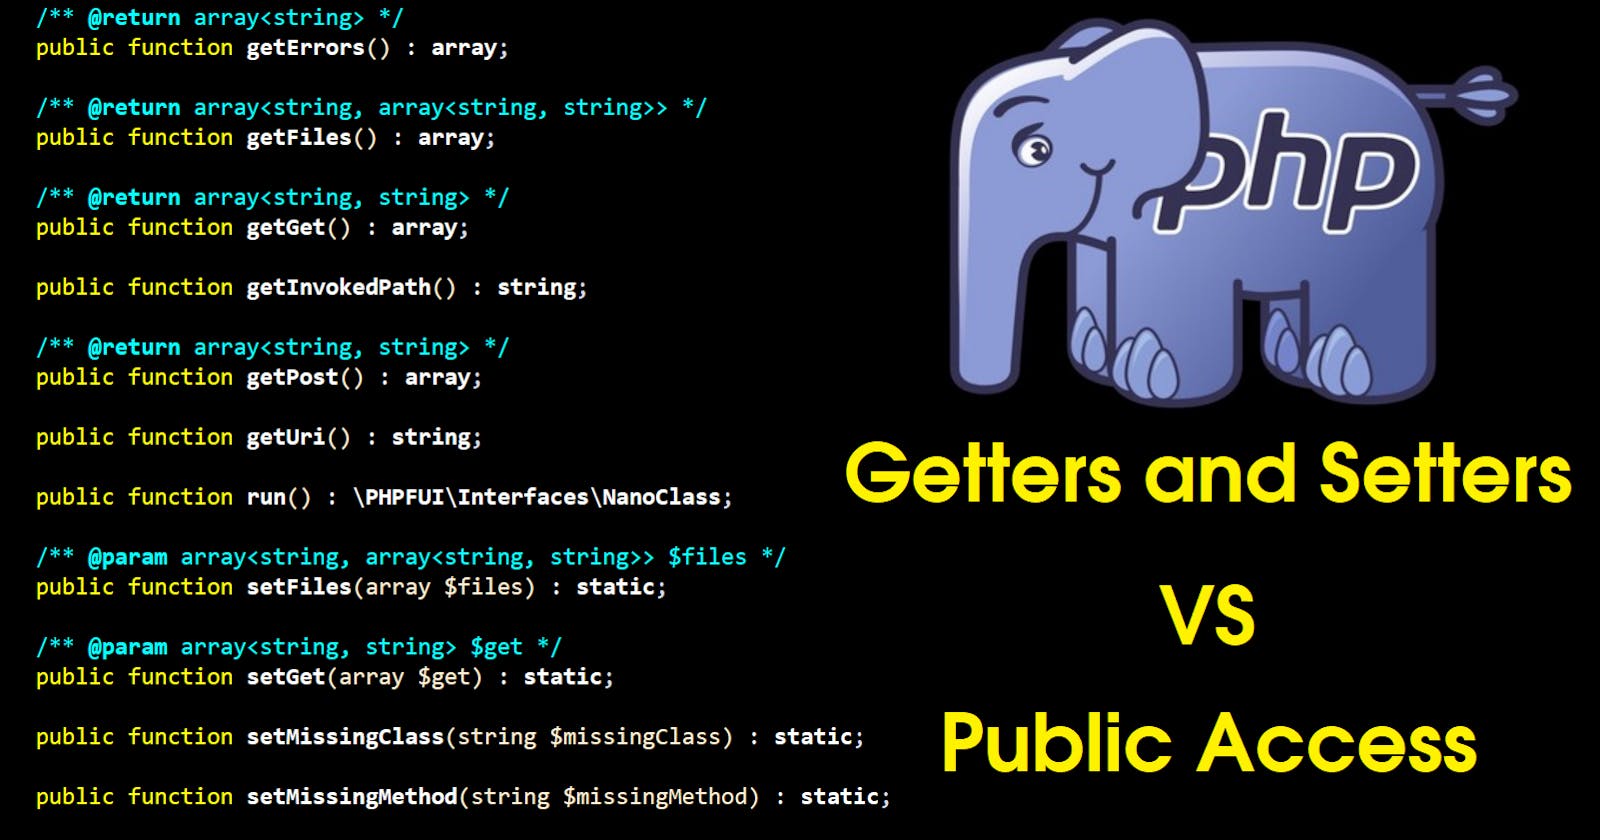 Getters and Setters vs Public Access